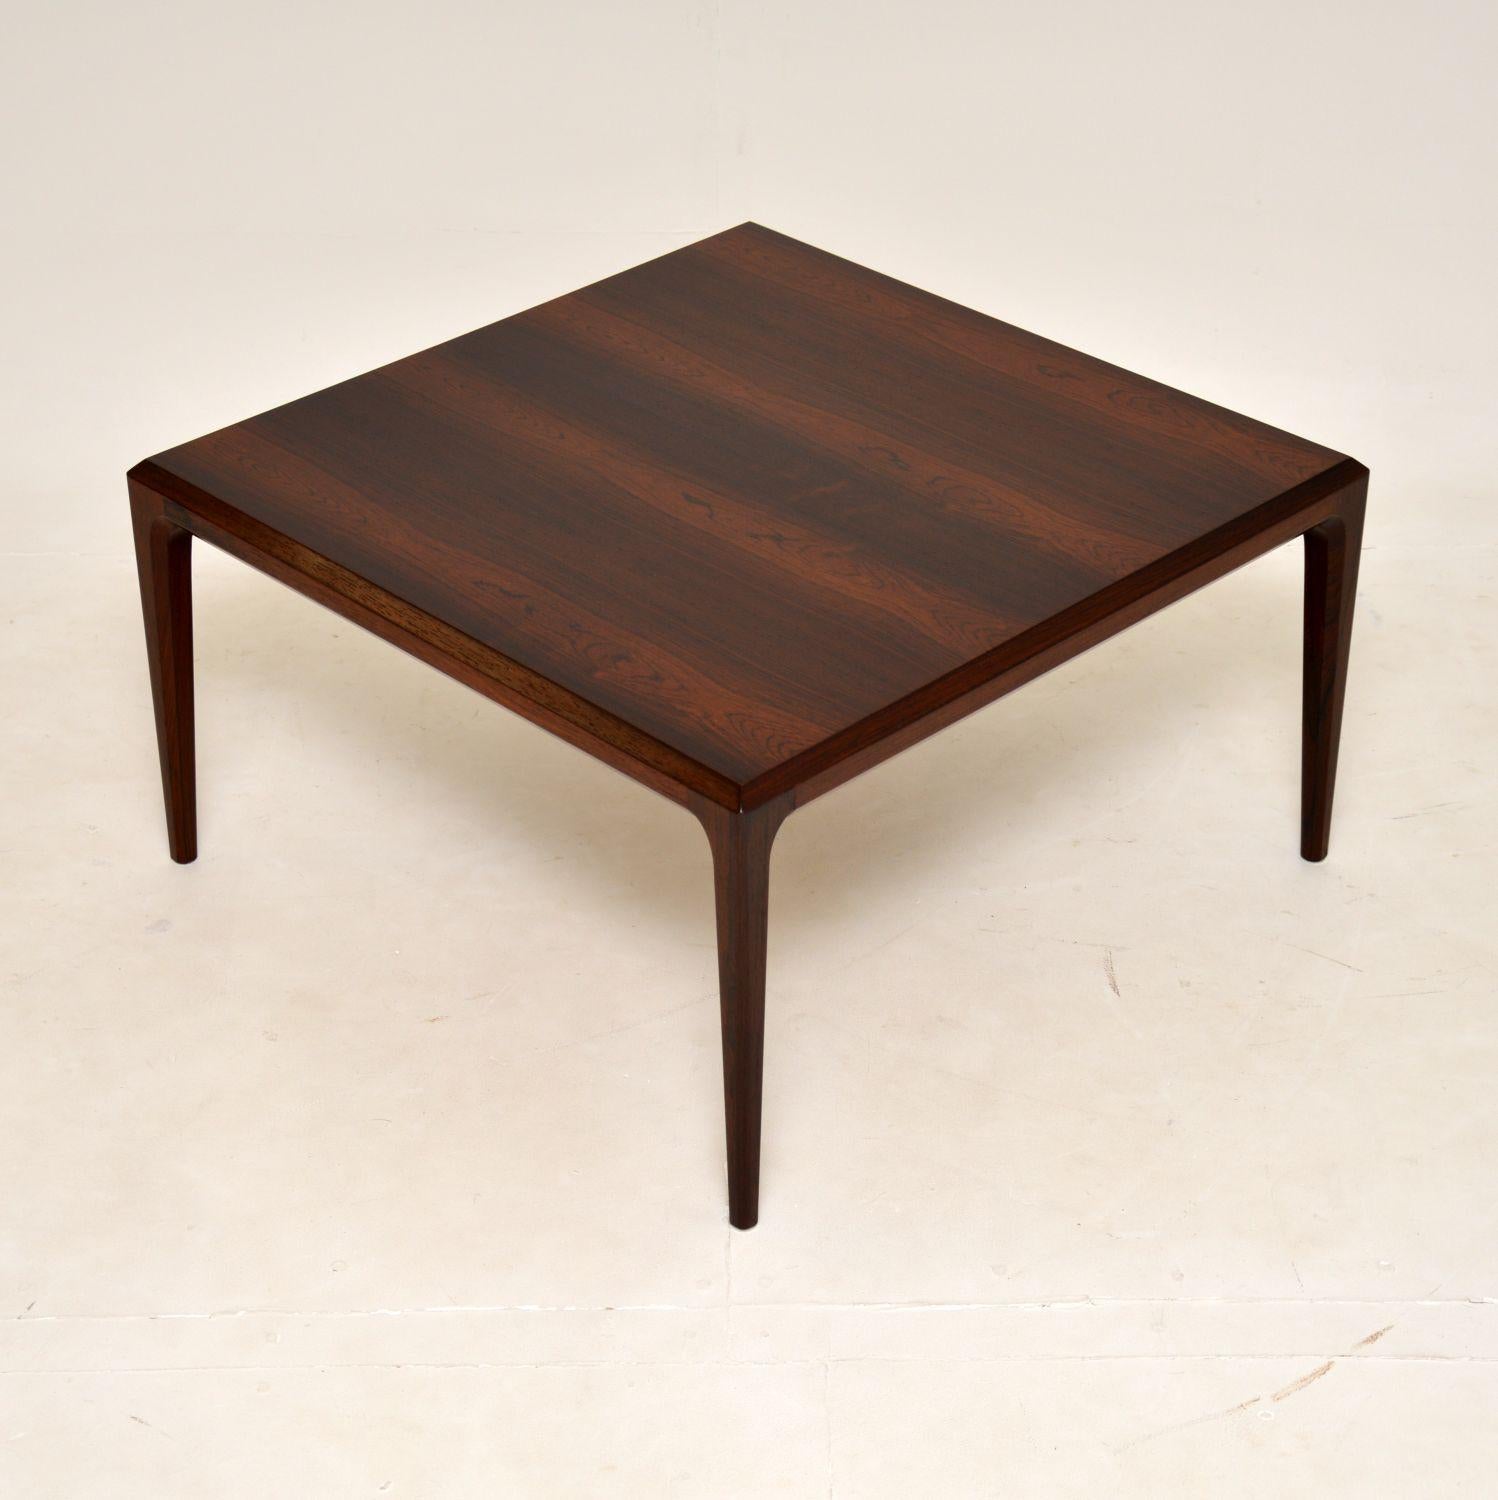 A stunning vintage Danish coffee table, this was made in Denmark by Silkeborg CFC. It dates from the 1960’s, and was designed by Johannes Andersen.

The quality is outstanding, it has some of the most stunning grain patterns you could find. It is